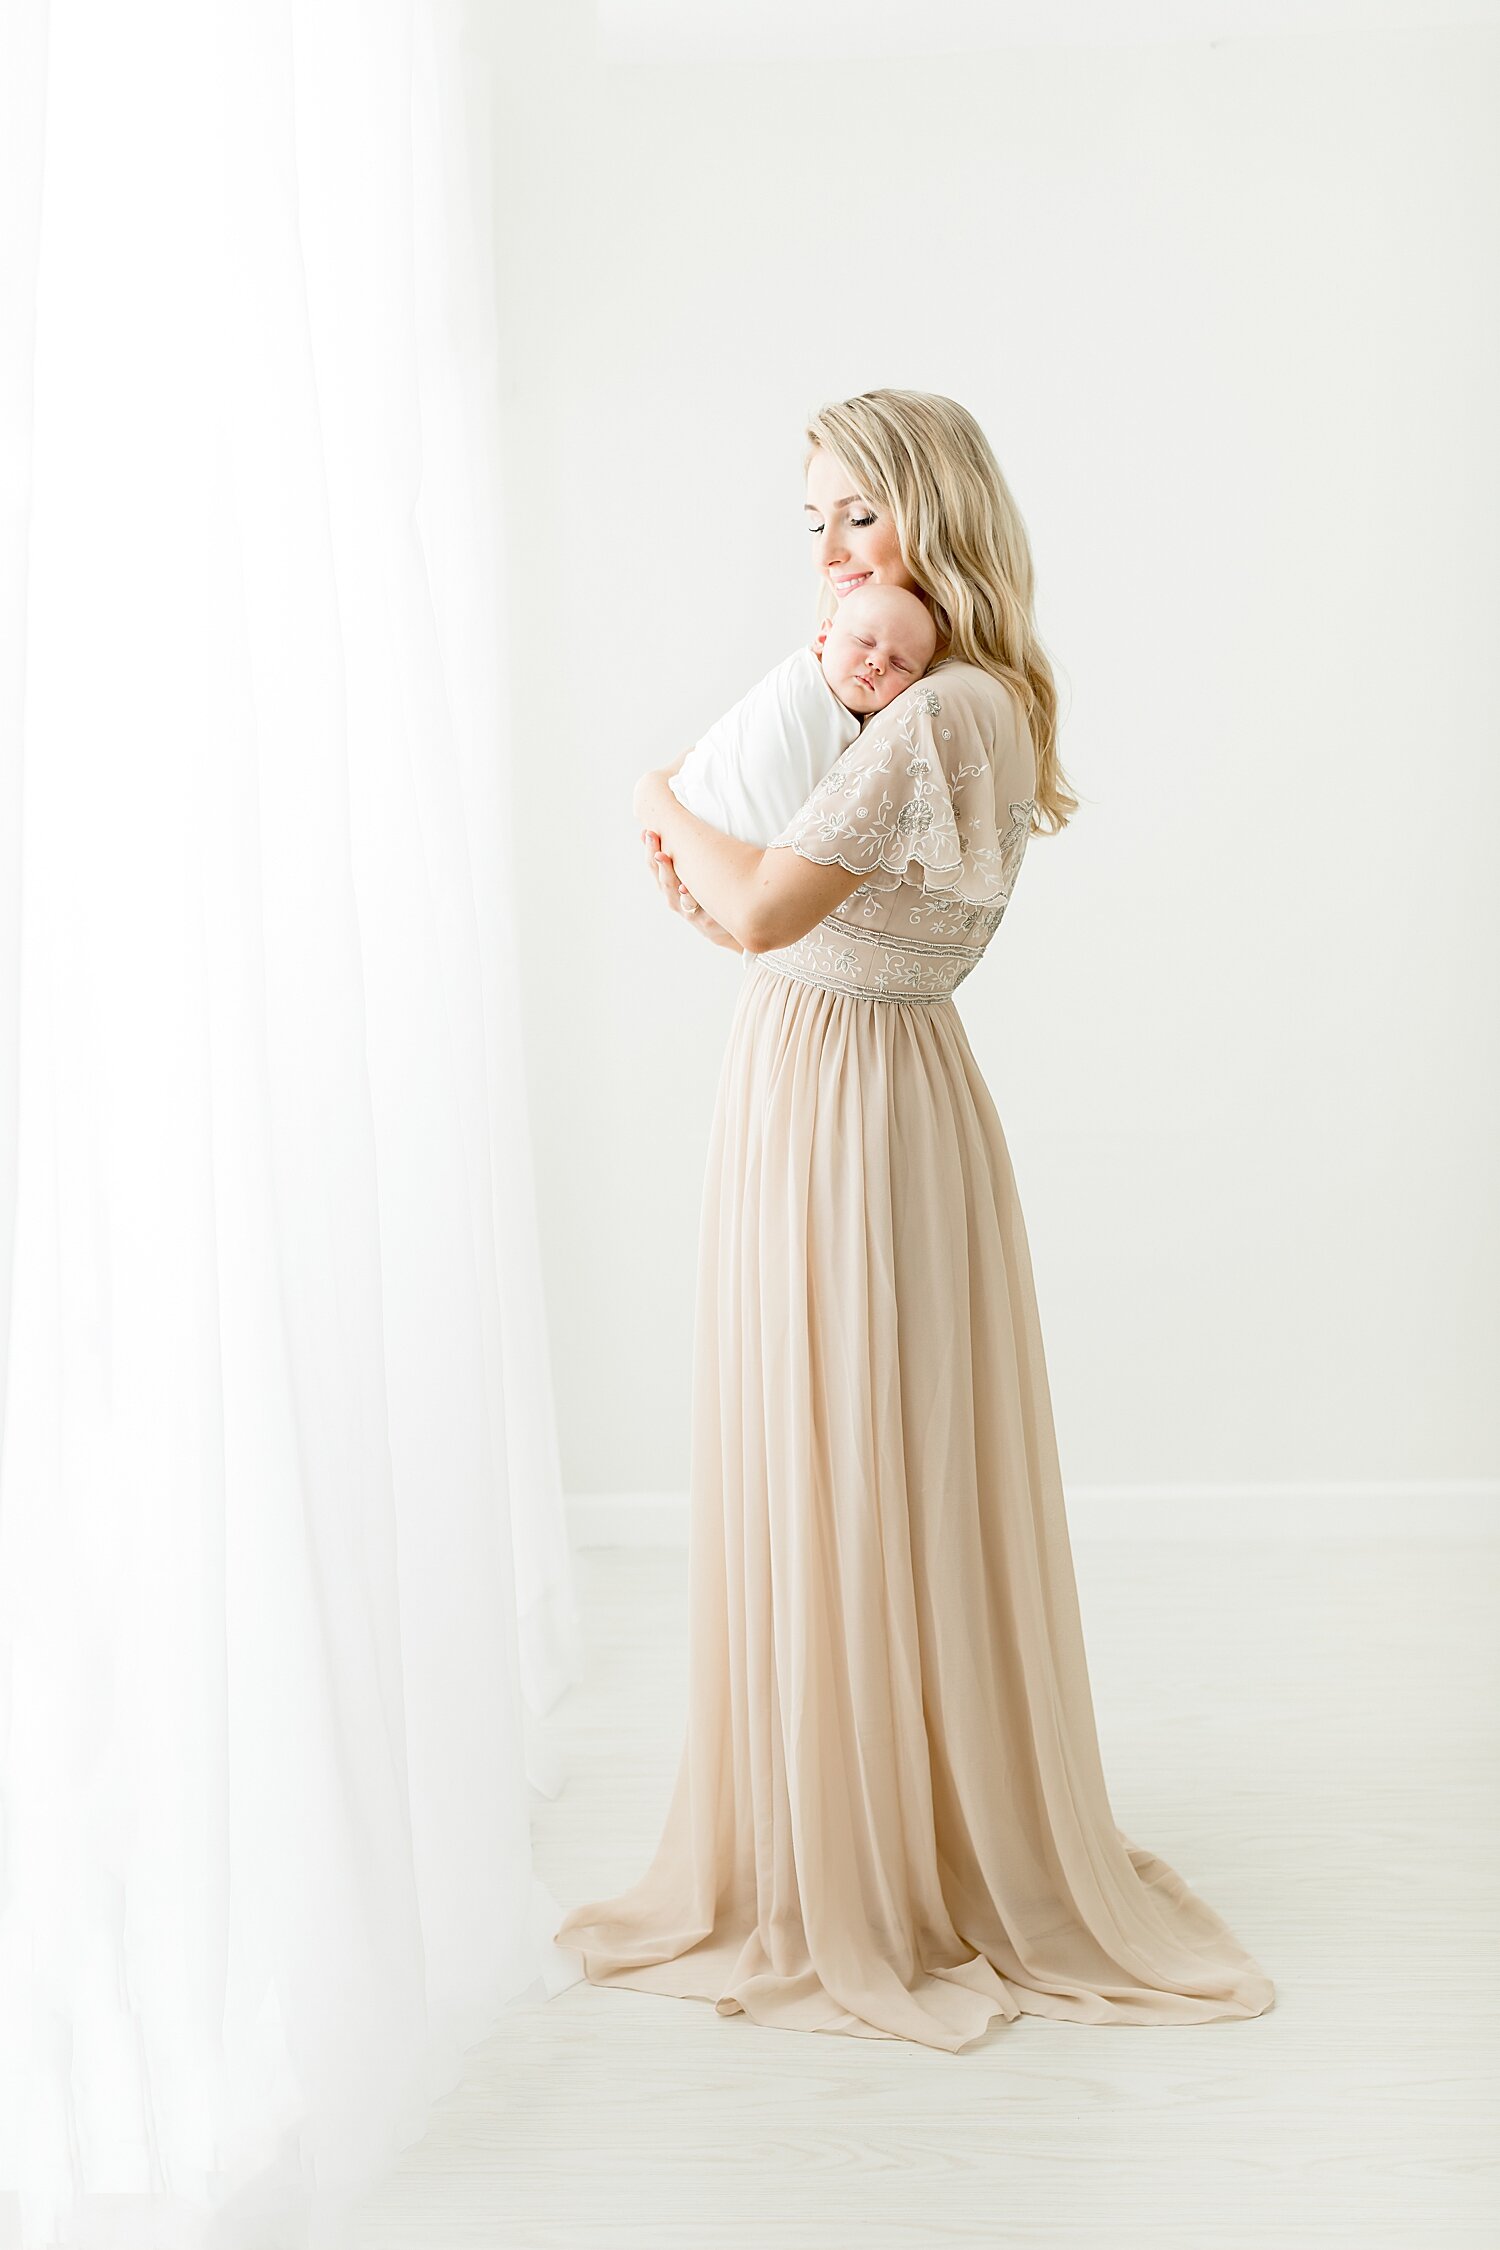 Classic newborn portrait of first time mom holding her baby girl. Photos by Kristin Wood Photography. 